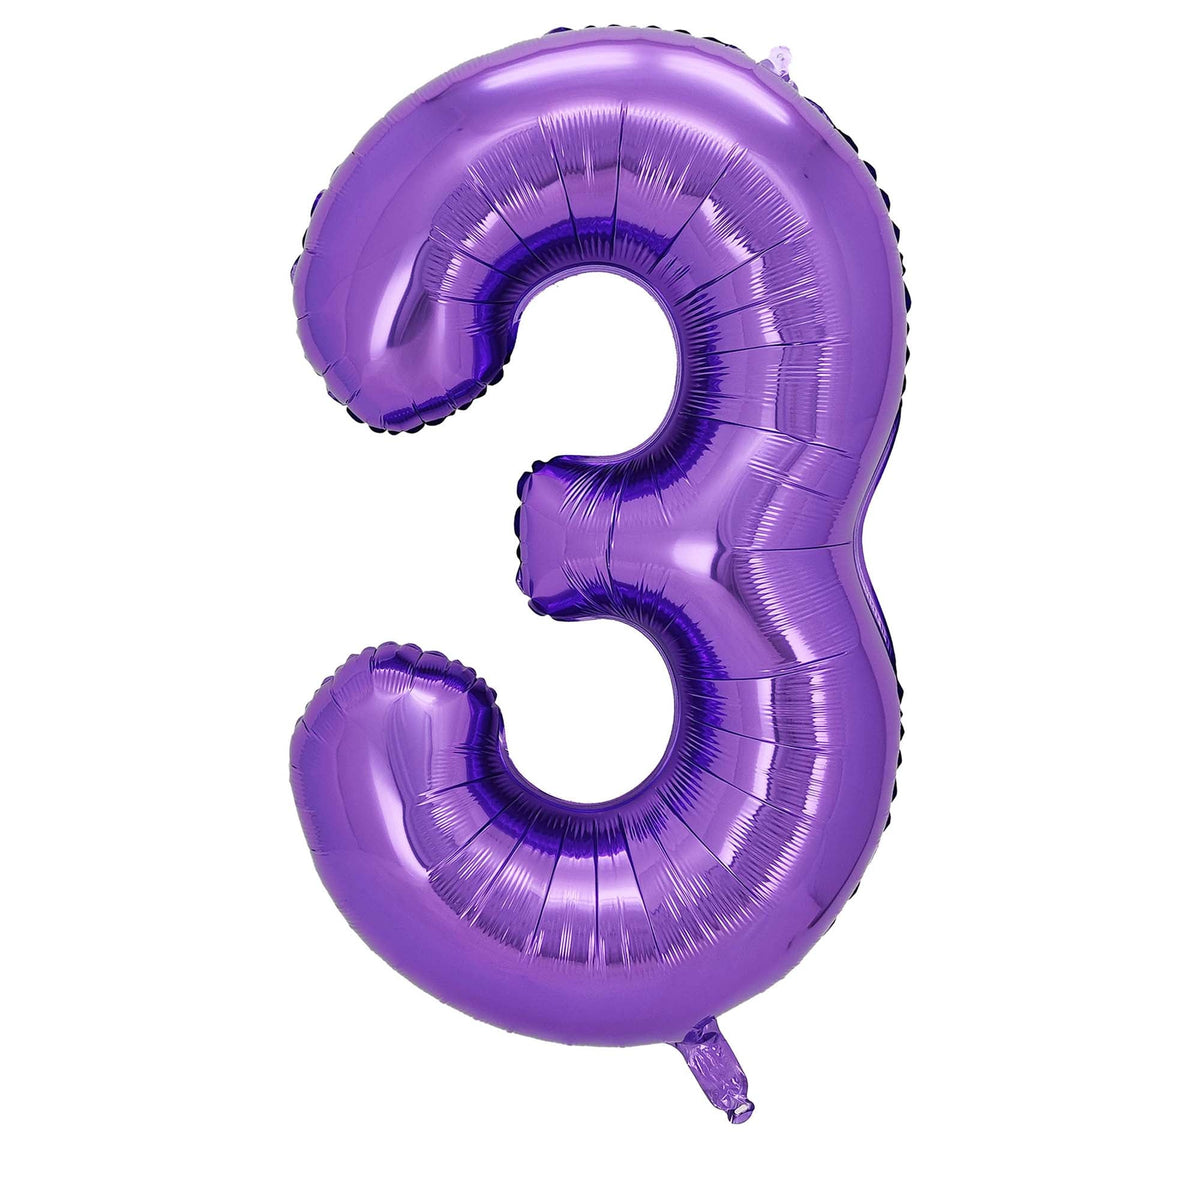 BOOMBA INTERNATIONAL TRADING CO,. LTD Balloons Purple Number 3 Supershape Foil Balloon, 40 Inches, 1 Count 810077659779